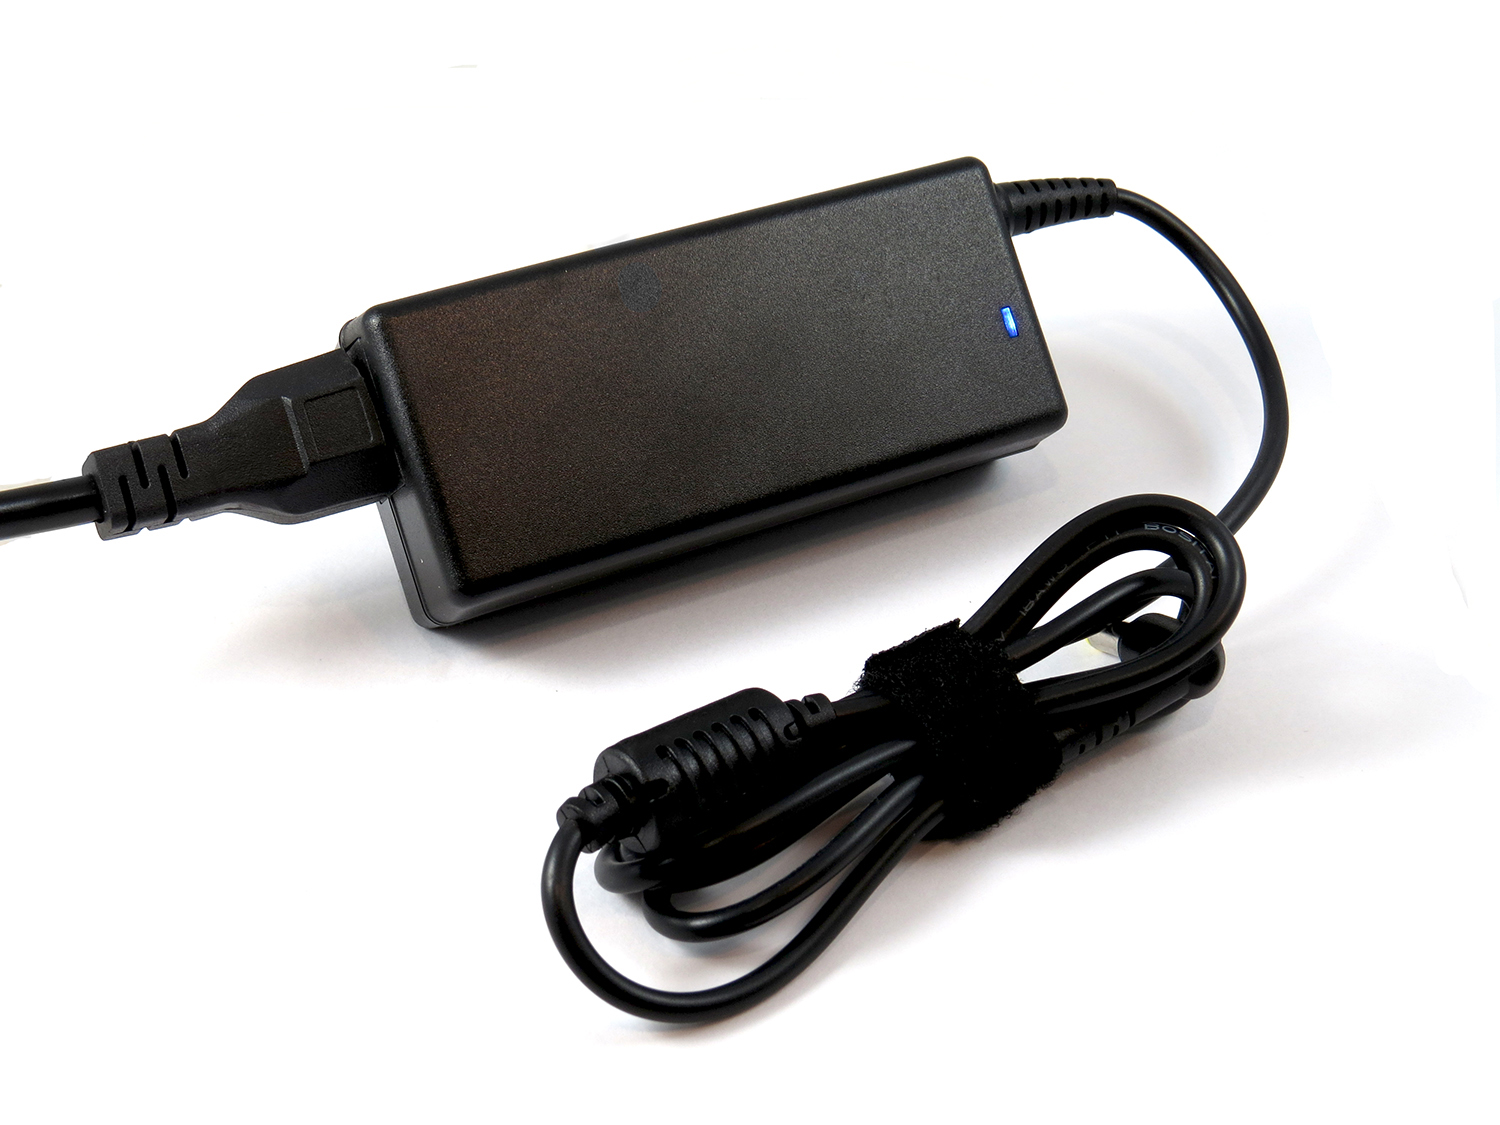 Ac Adapter for Acer Aspire 5002WLMi - image 2 of 3